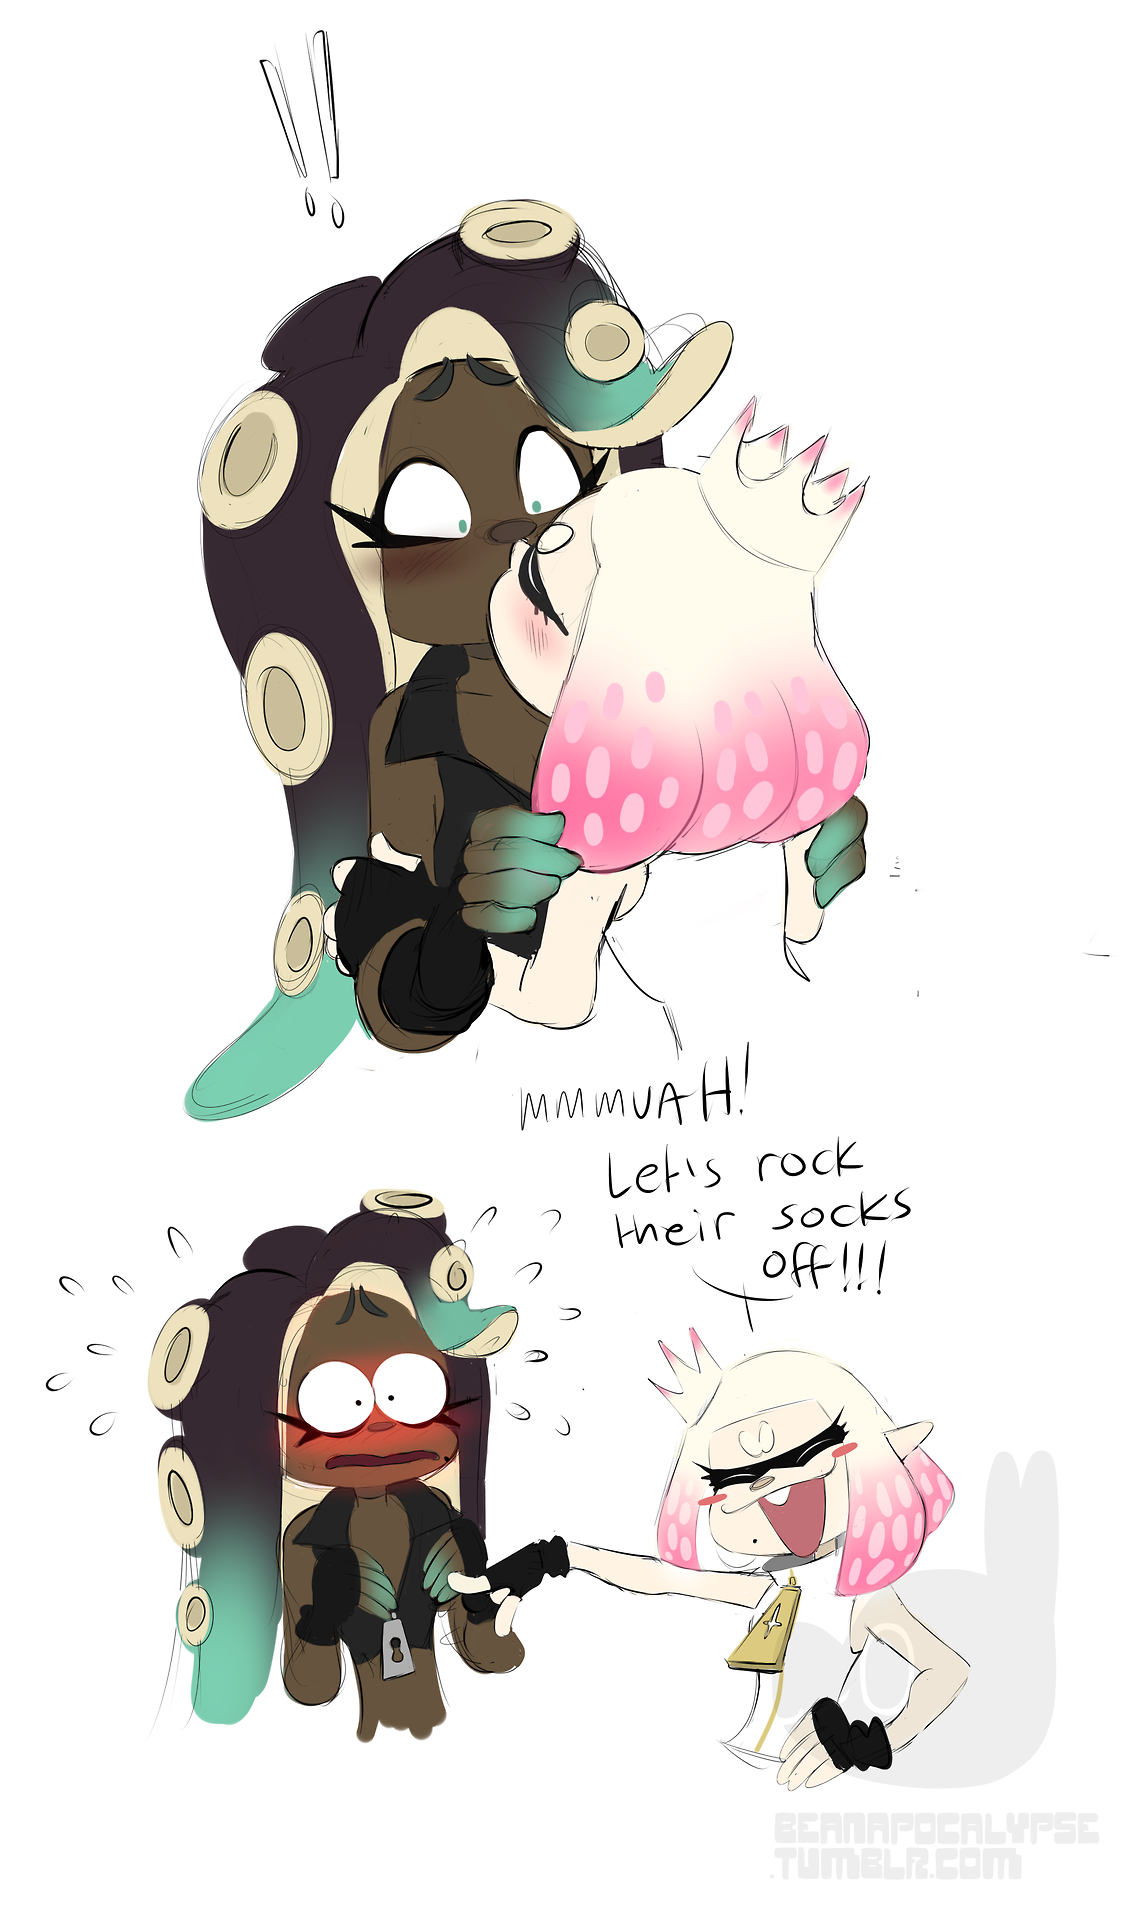 beanapocalypse: Encouragement kisses. Or maybe not? Please reblog if you can. 